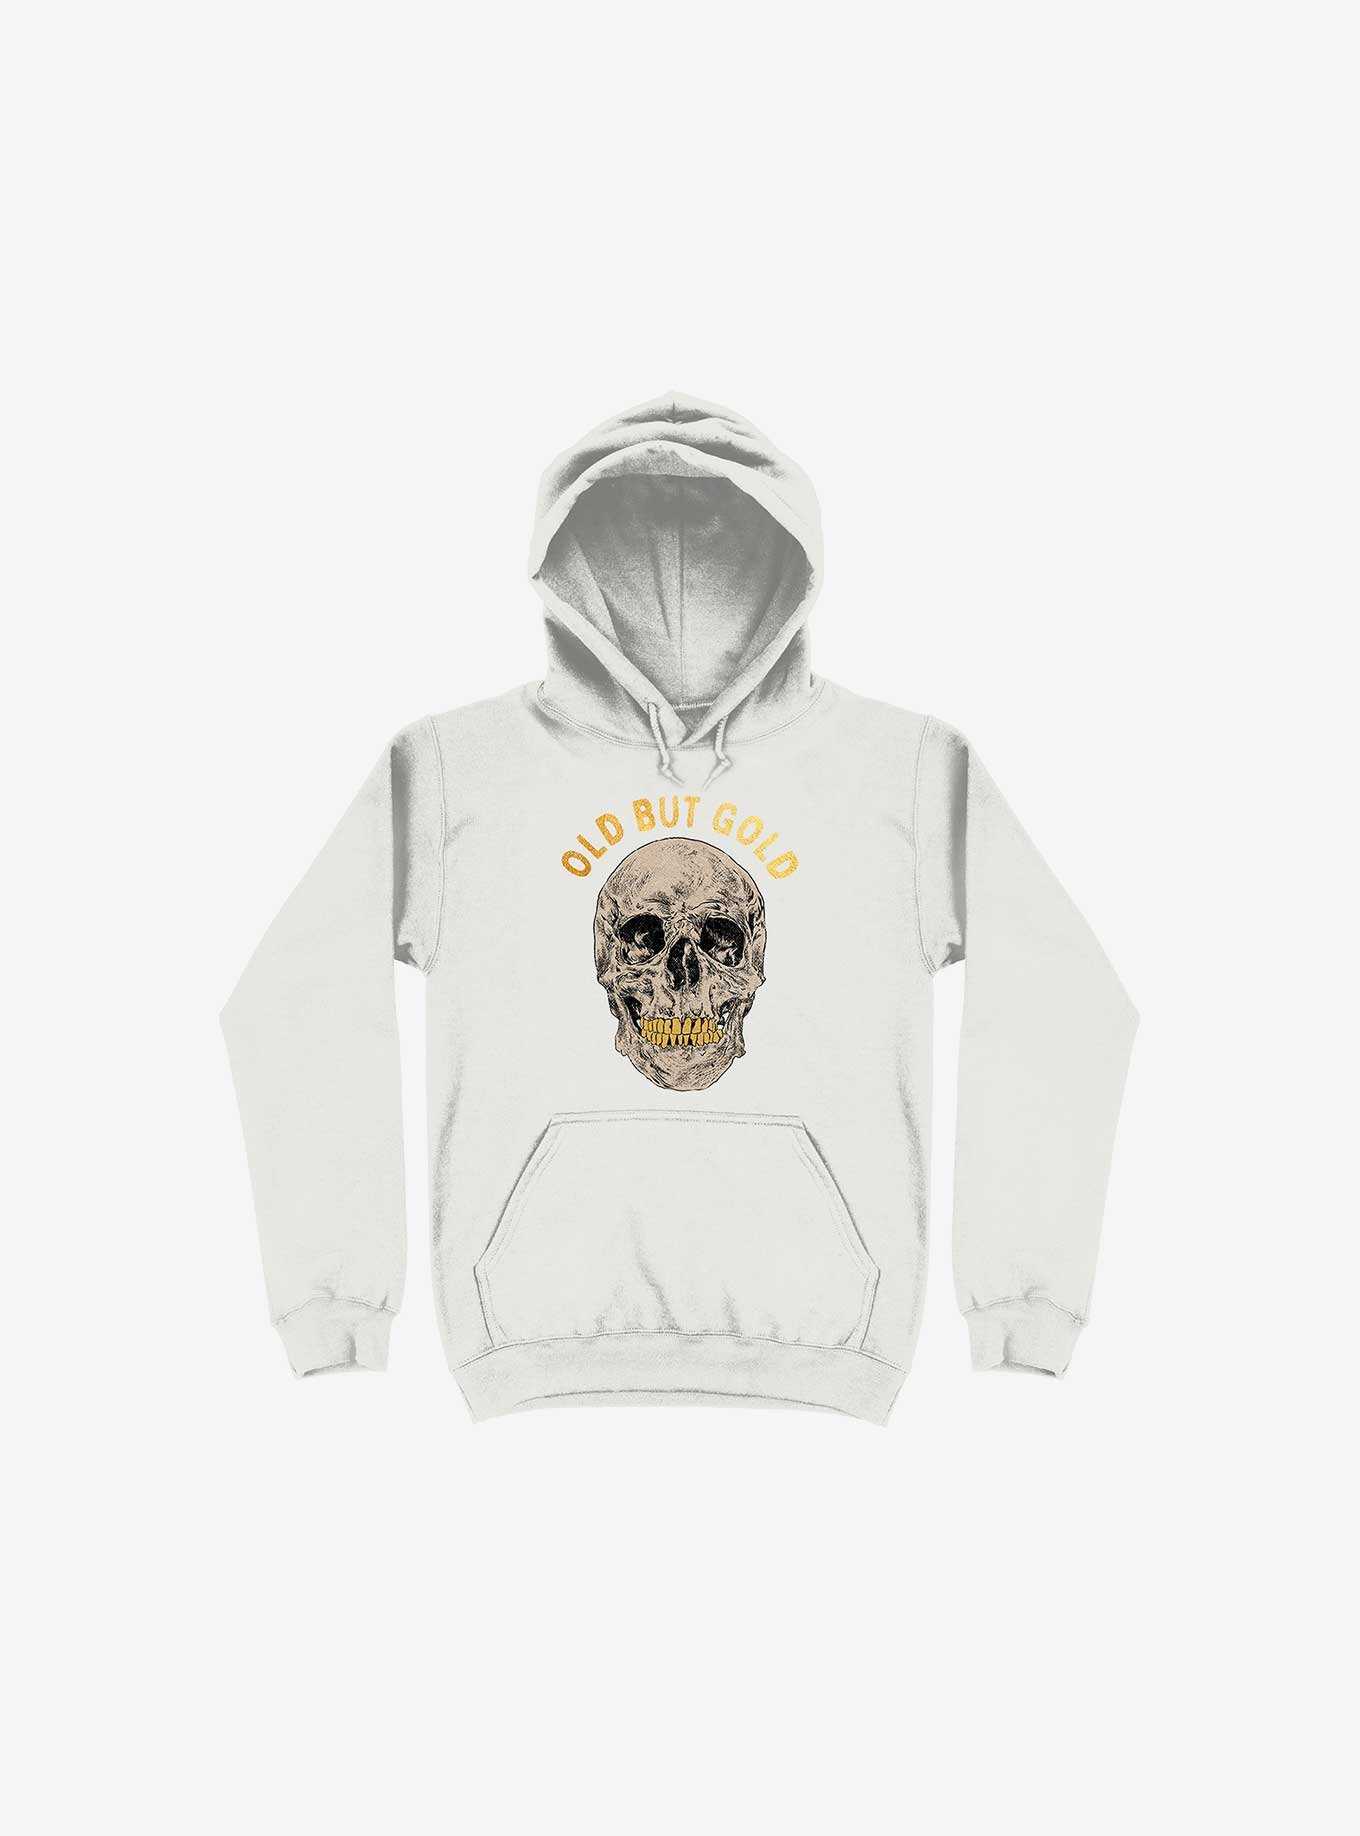 Old But Gold Skull White Hoodie, , hi-res